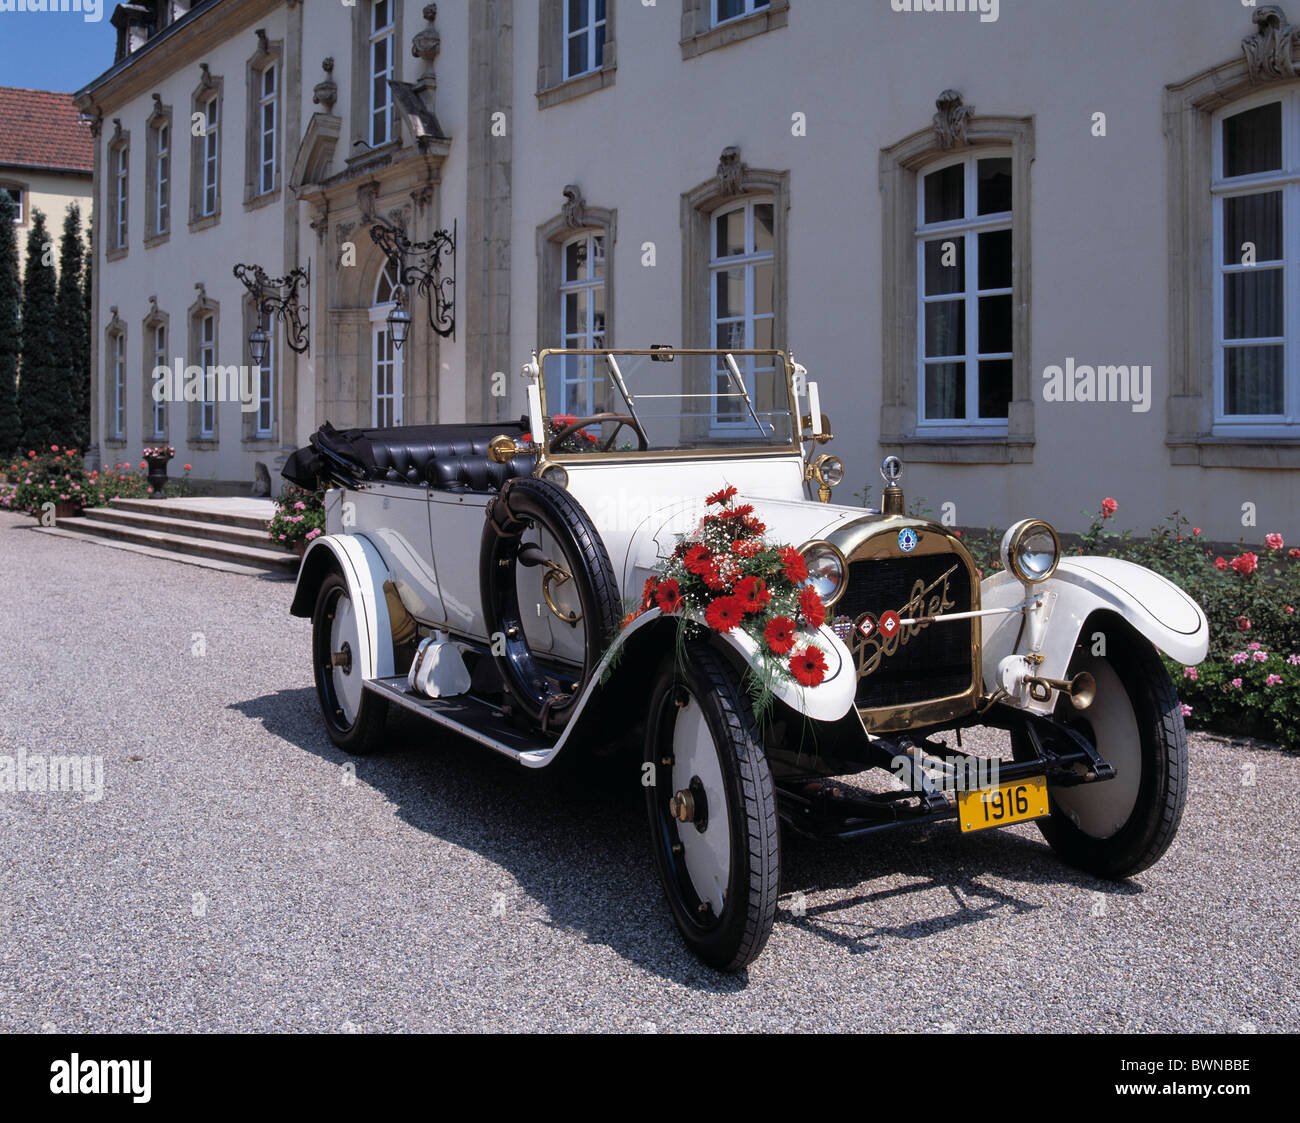 car manor house Luxembourg Europe motorcar auto automobile oldtimer Berliet construction year 1916 1916 model Stock Photo